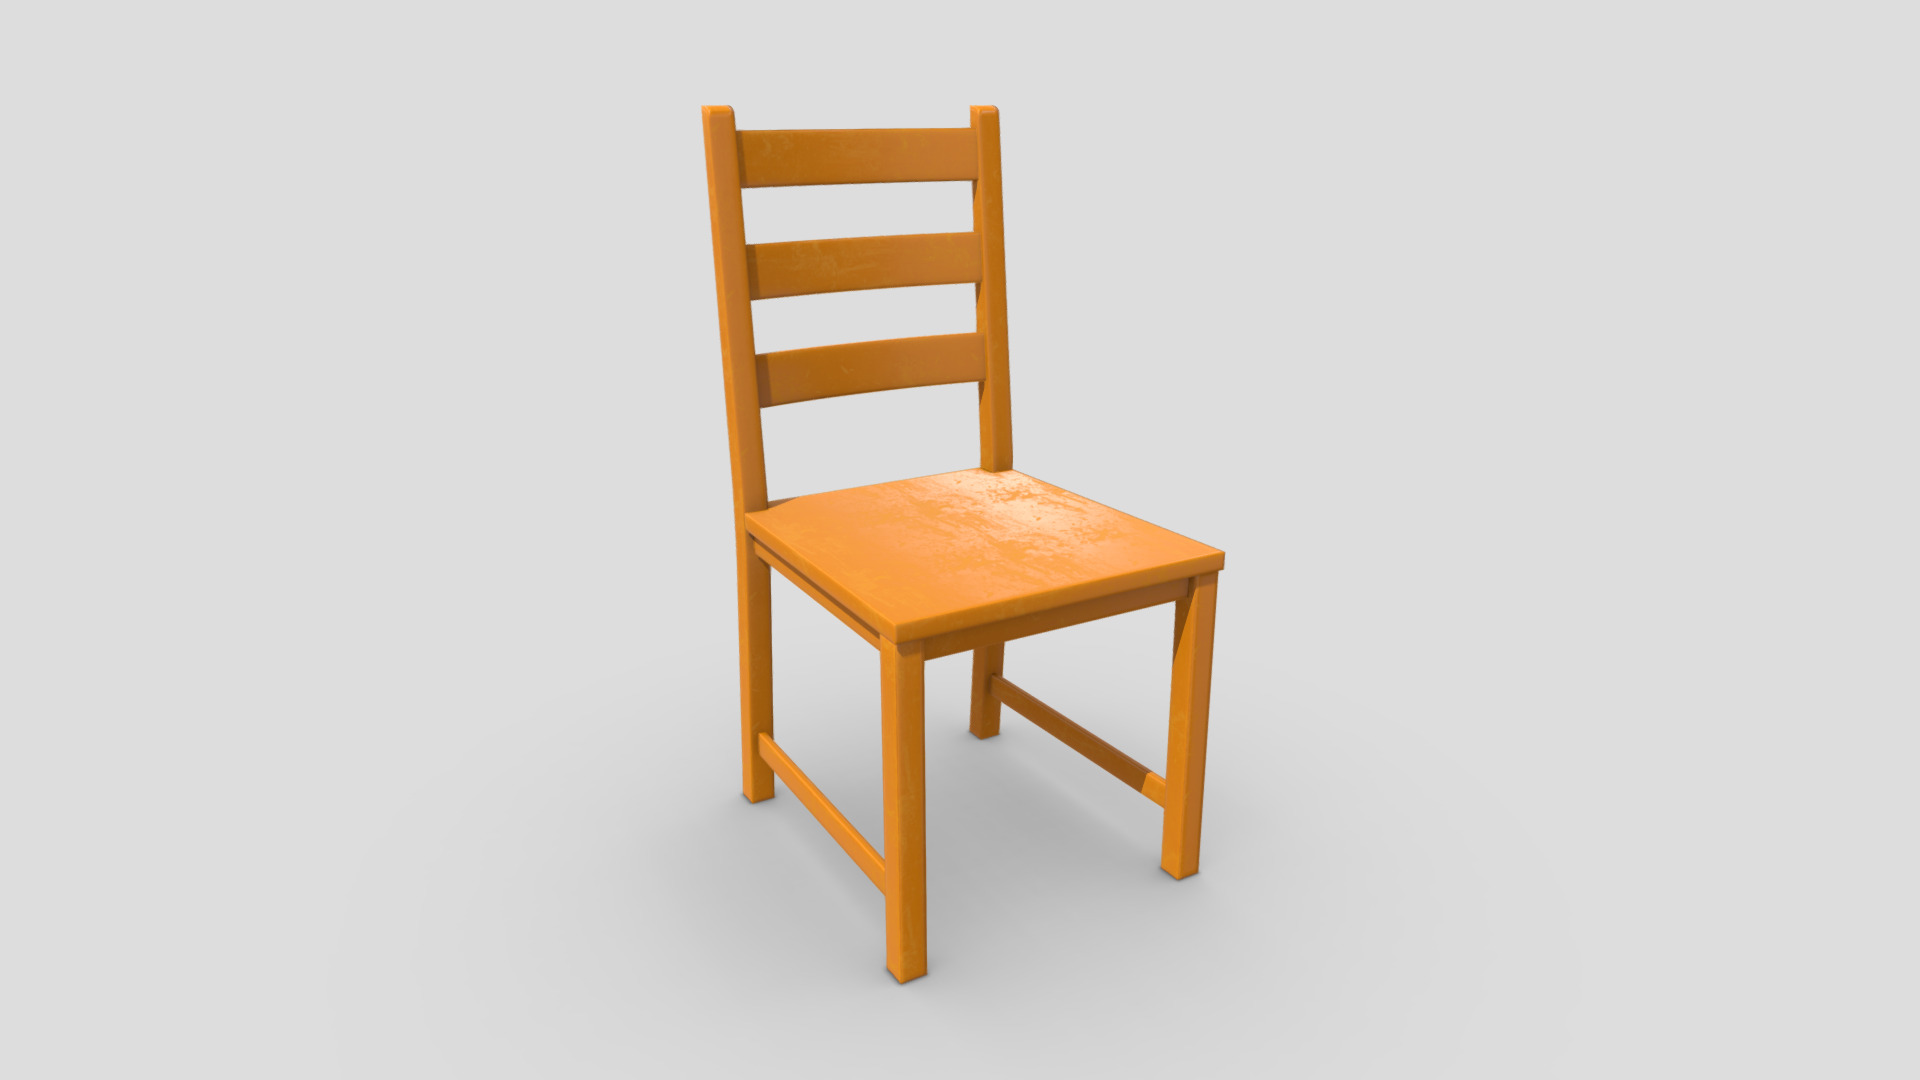 3D model Chair 6 - This is a 3D model of the Chair 6. The 3D model is about a wooden chair against a white background.